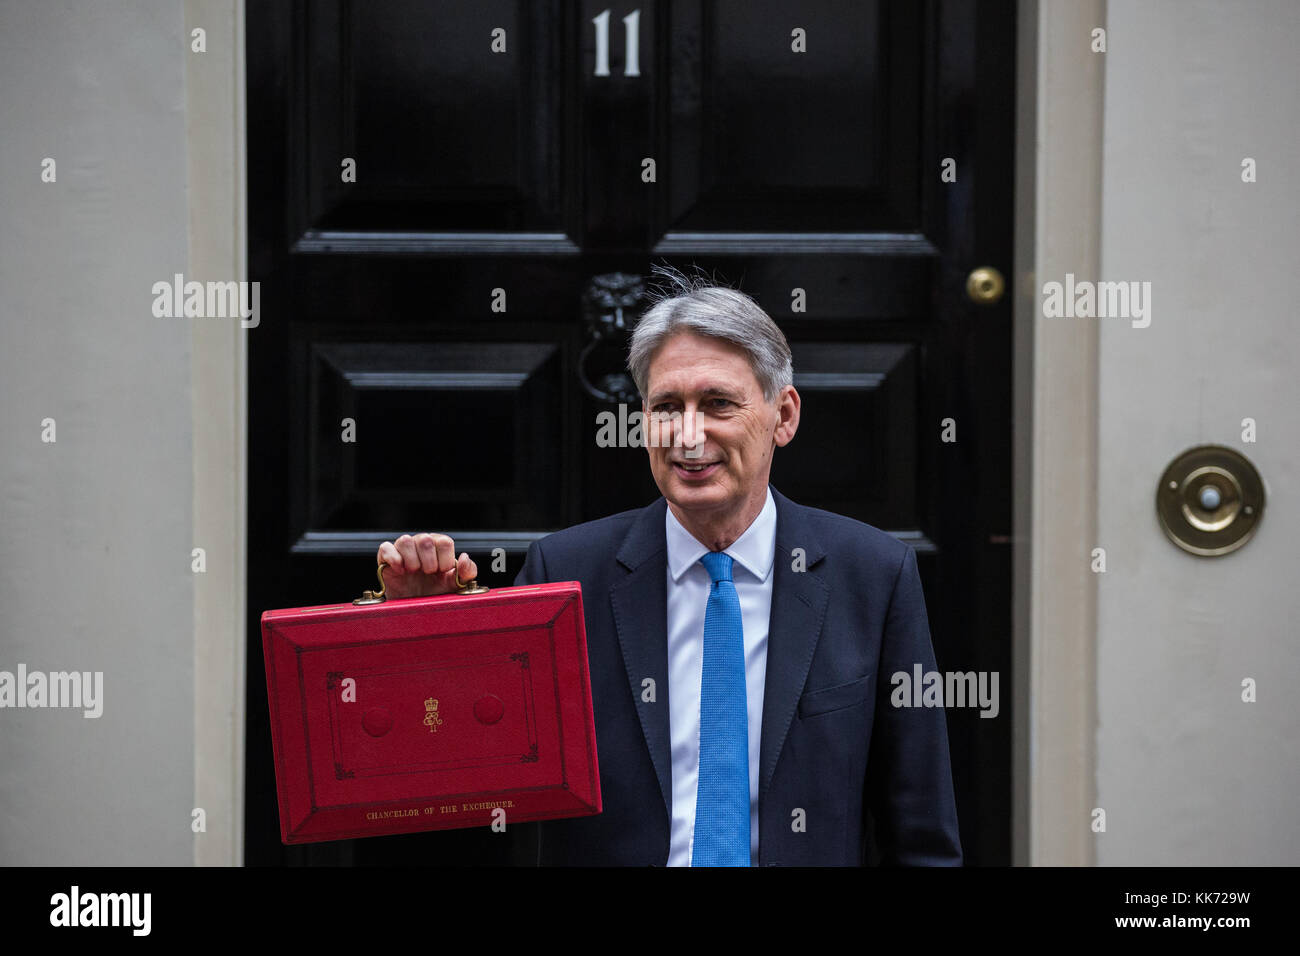 London, UK. 22nd November, 2017. Philip Hammond MP, Chancellor of the Exchequer, holds up the red case as he leaves 11 Downing Street to make his Budg Stock Photo